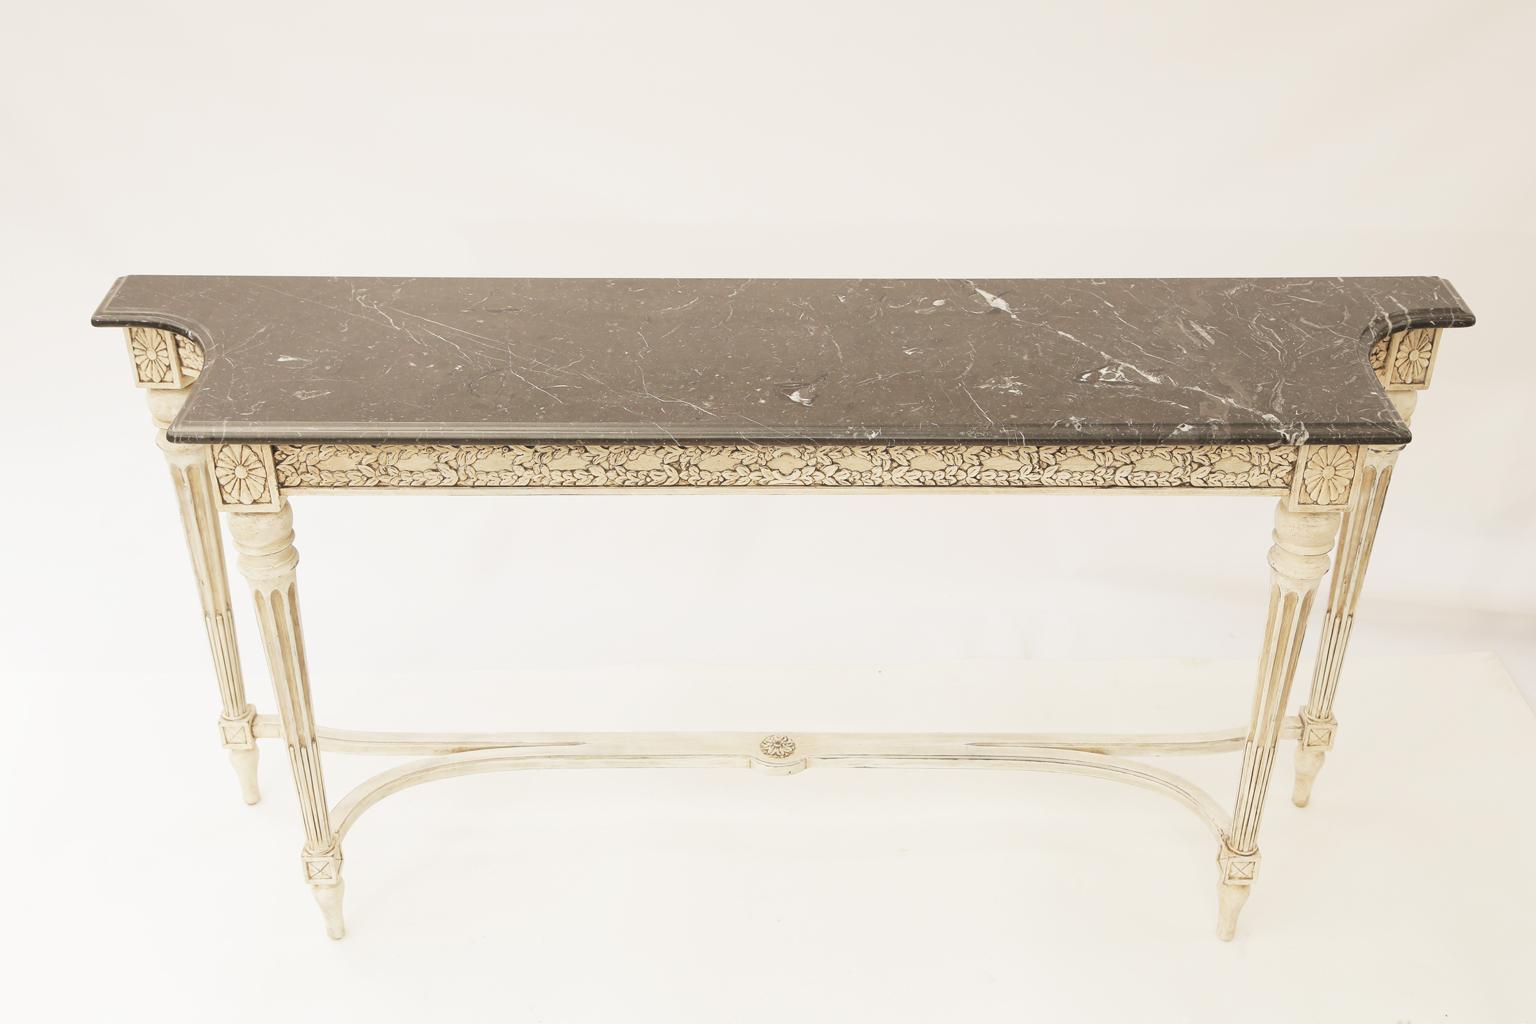 Console table, in the Louis XVI style, having a narrow rectangular top of black Marquina marble with concave, cut-out corners, on conforming table base with a painted finish showing natural wear, its apron carved with laureling, raised on